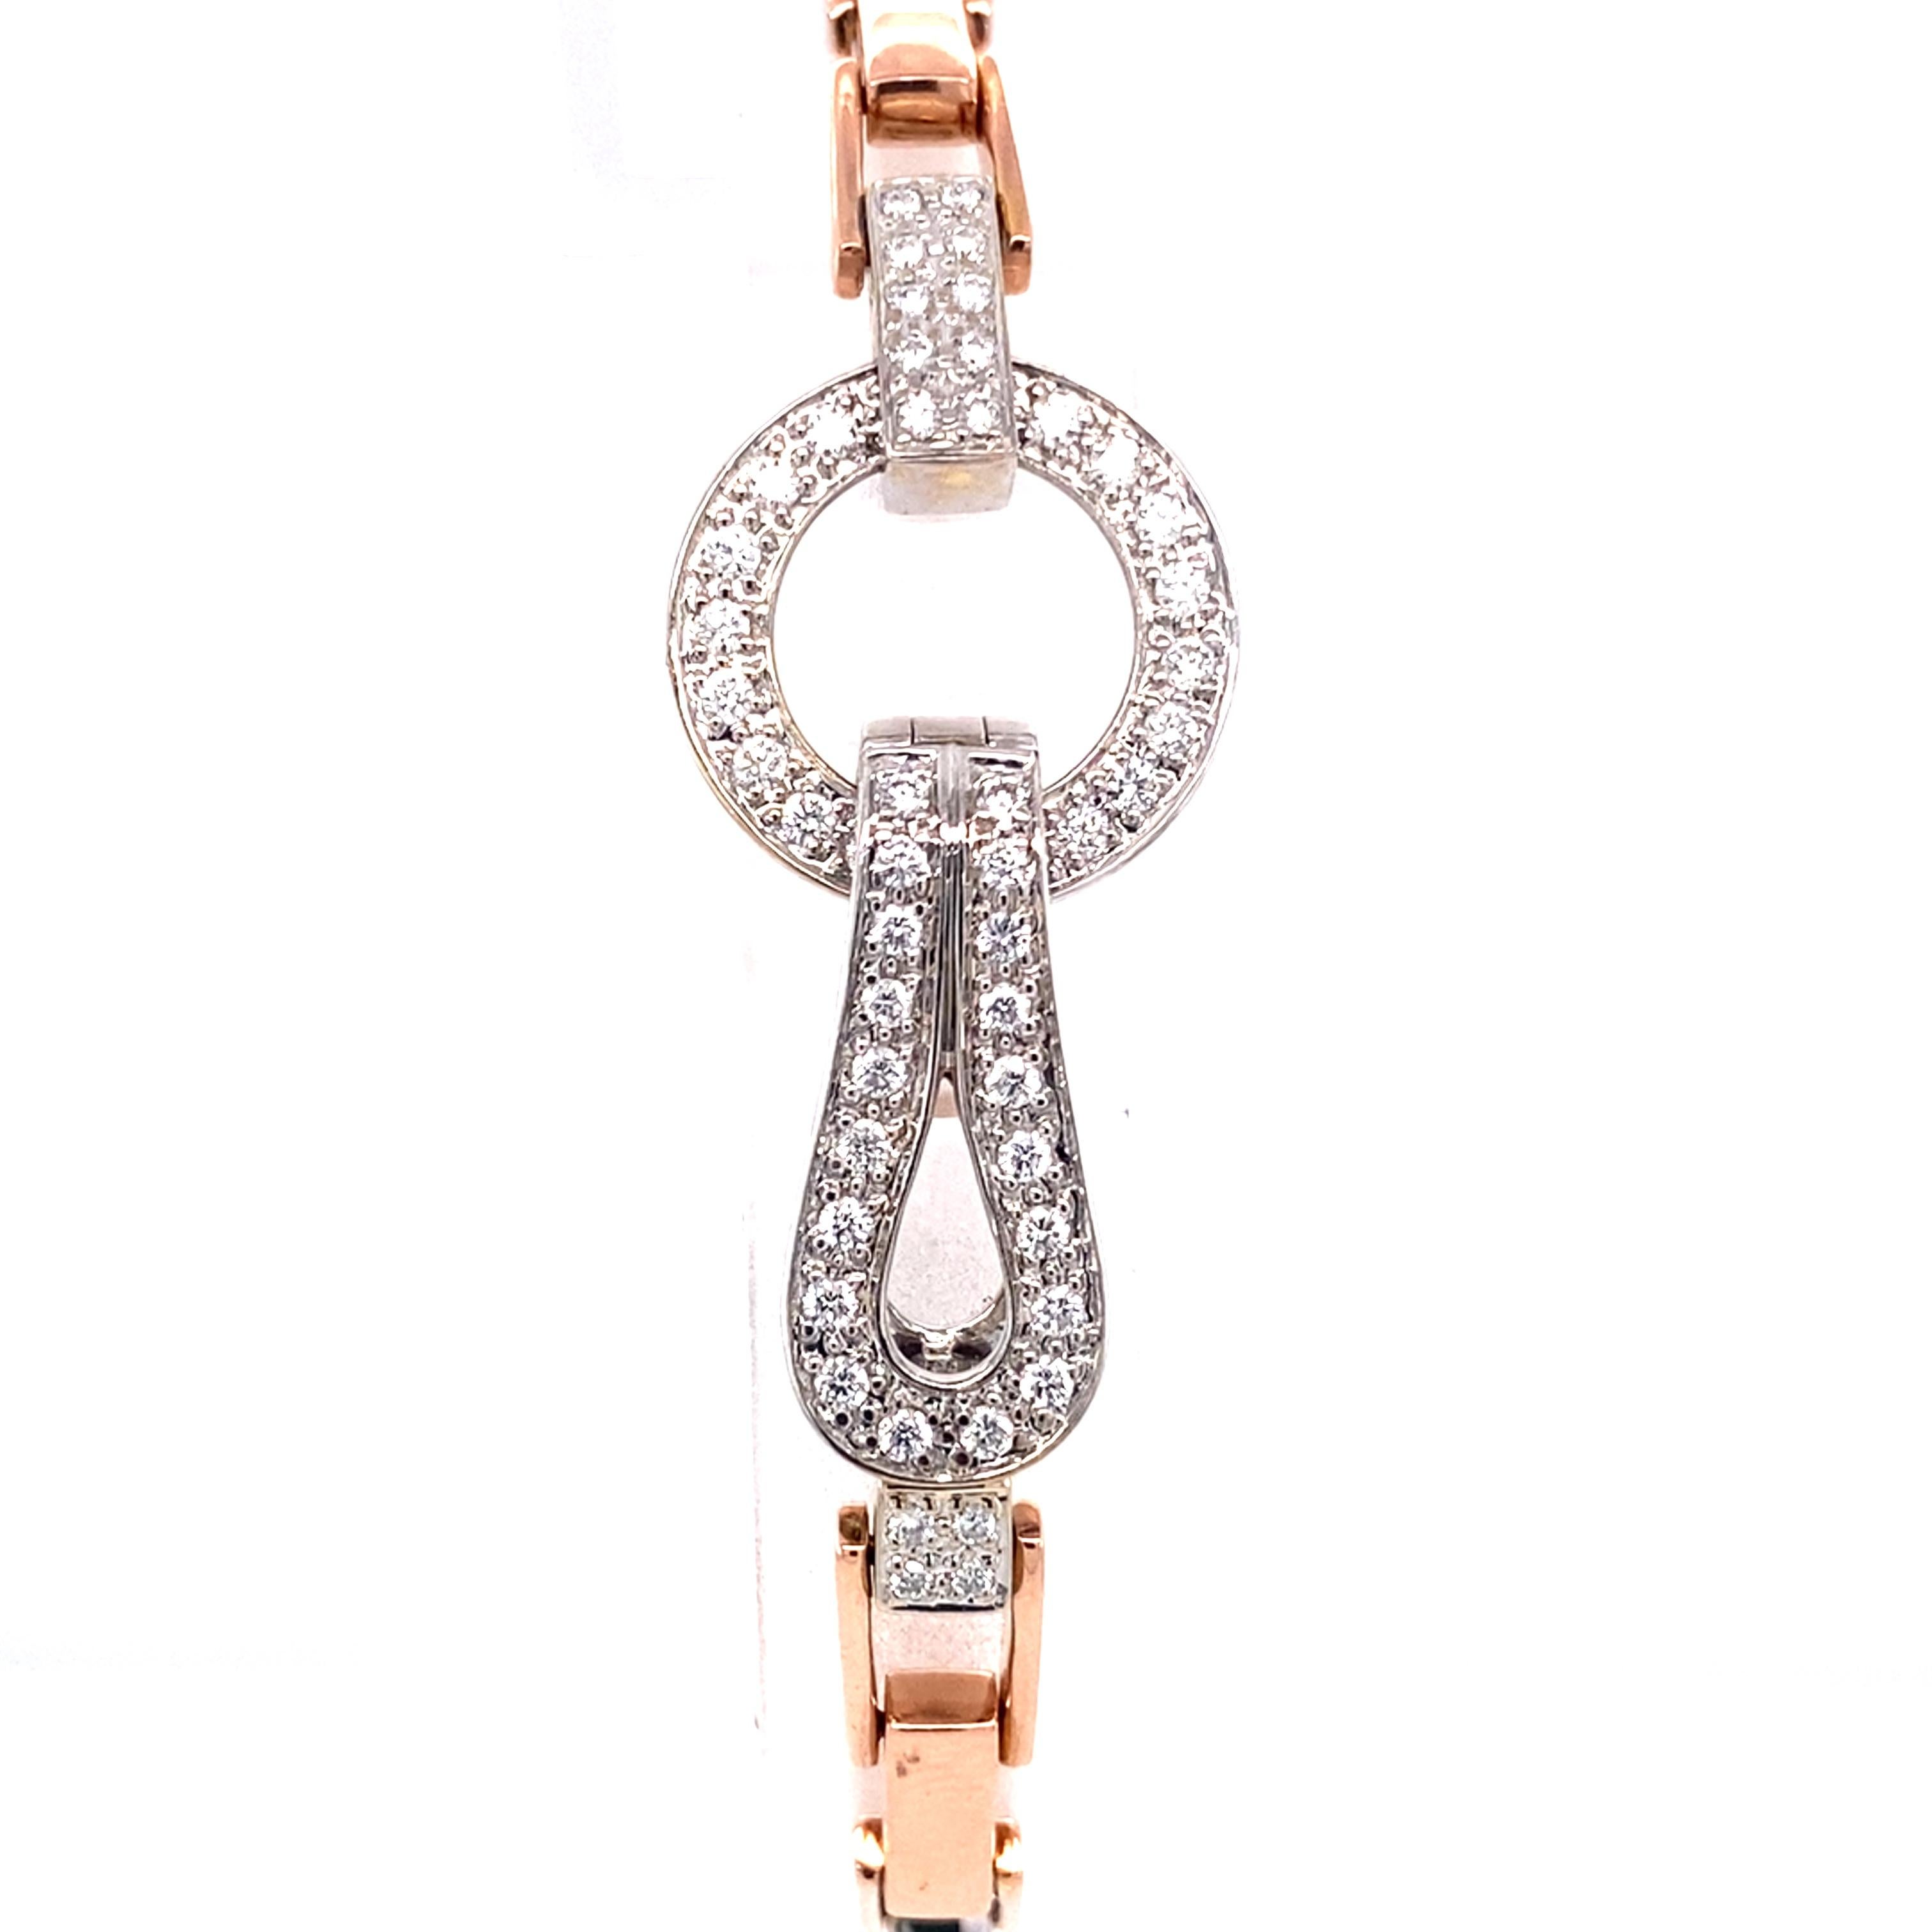 Item Details: 
Bracelet Length: 7 inches
Metal Type: 18 karat rose and white gold
Weight: 16.9 grams
Year: 1980s

Diamond Details:
Cut: Round
Carat: 2.00 Carats total weight
Color: G-H
Clarity: VS

Item Features:
This bracelet features 2.00 carat